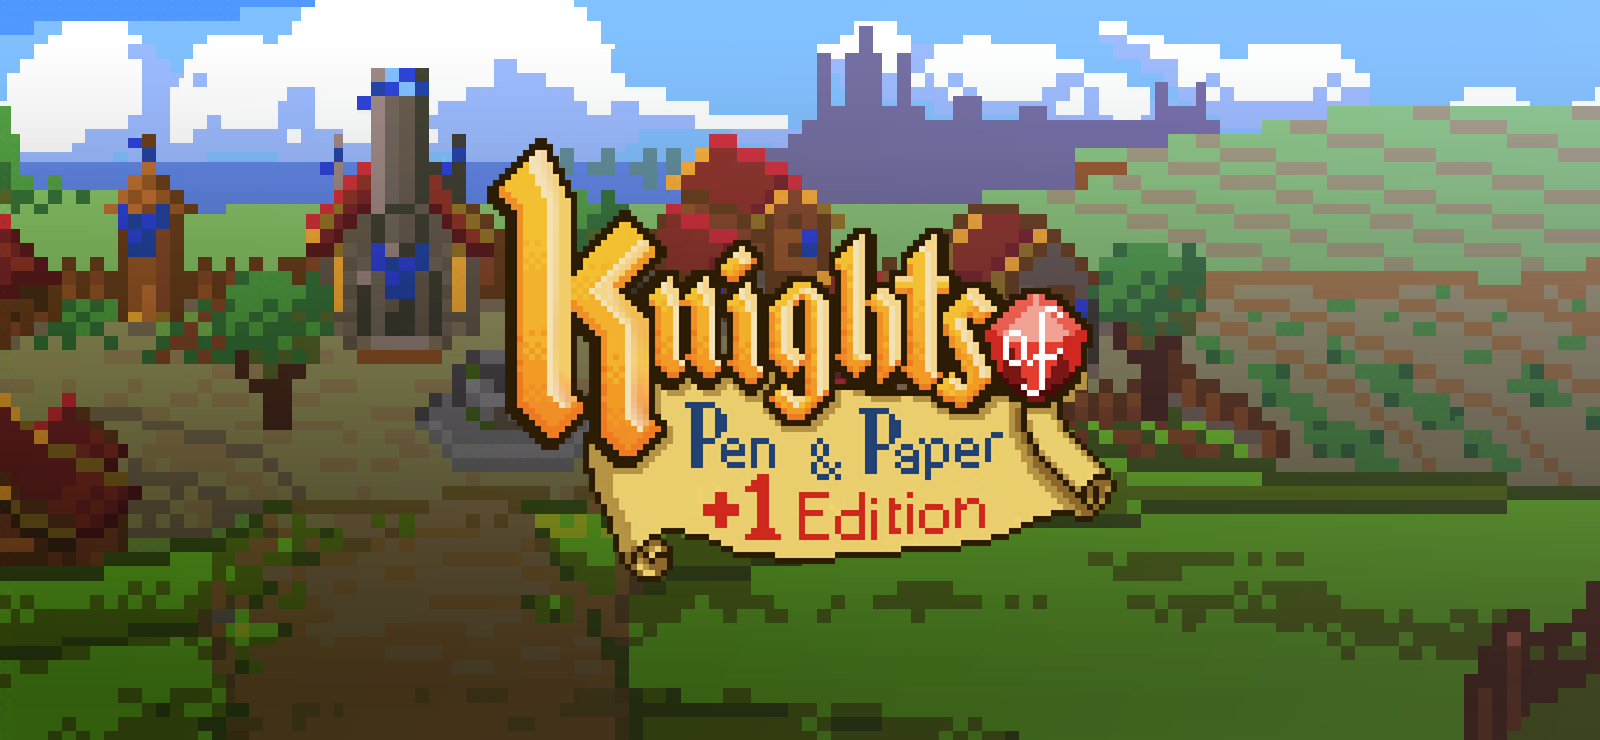 Knights Of Pen And Paper +1 Edition